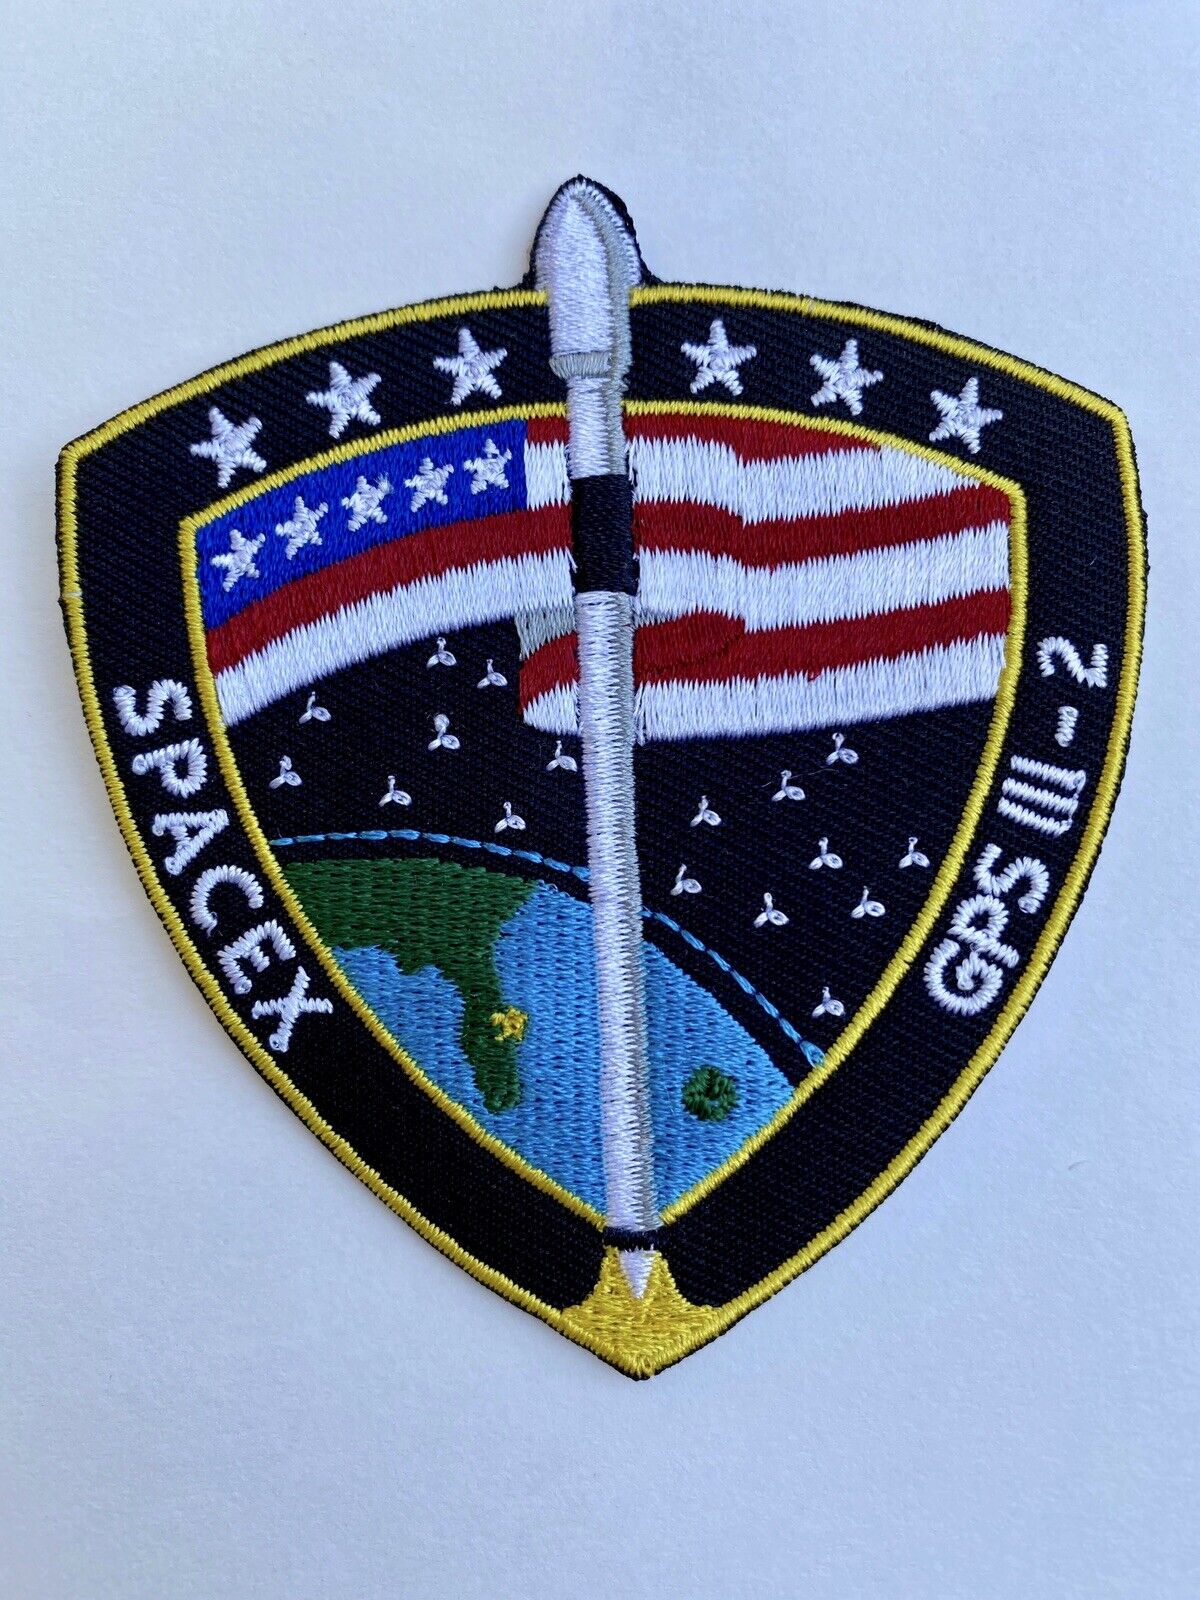 SPACE X GPS III-2 FALCON 9 MISSION PATCH 3.5” NEW